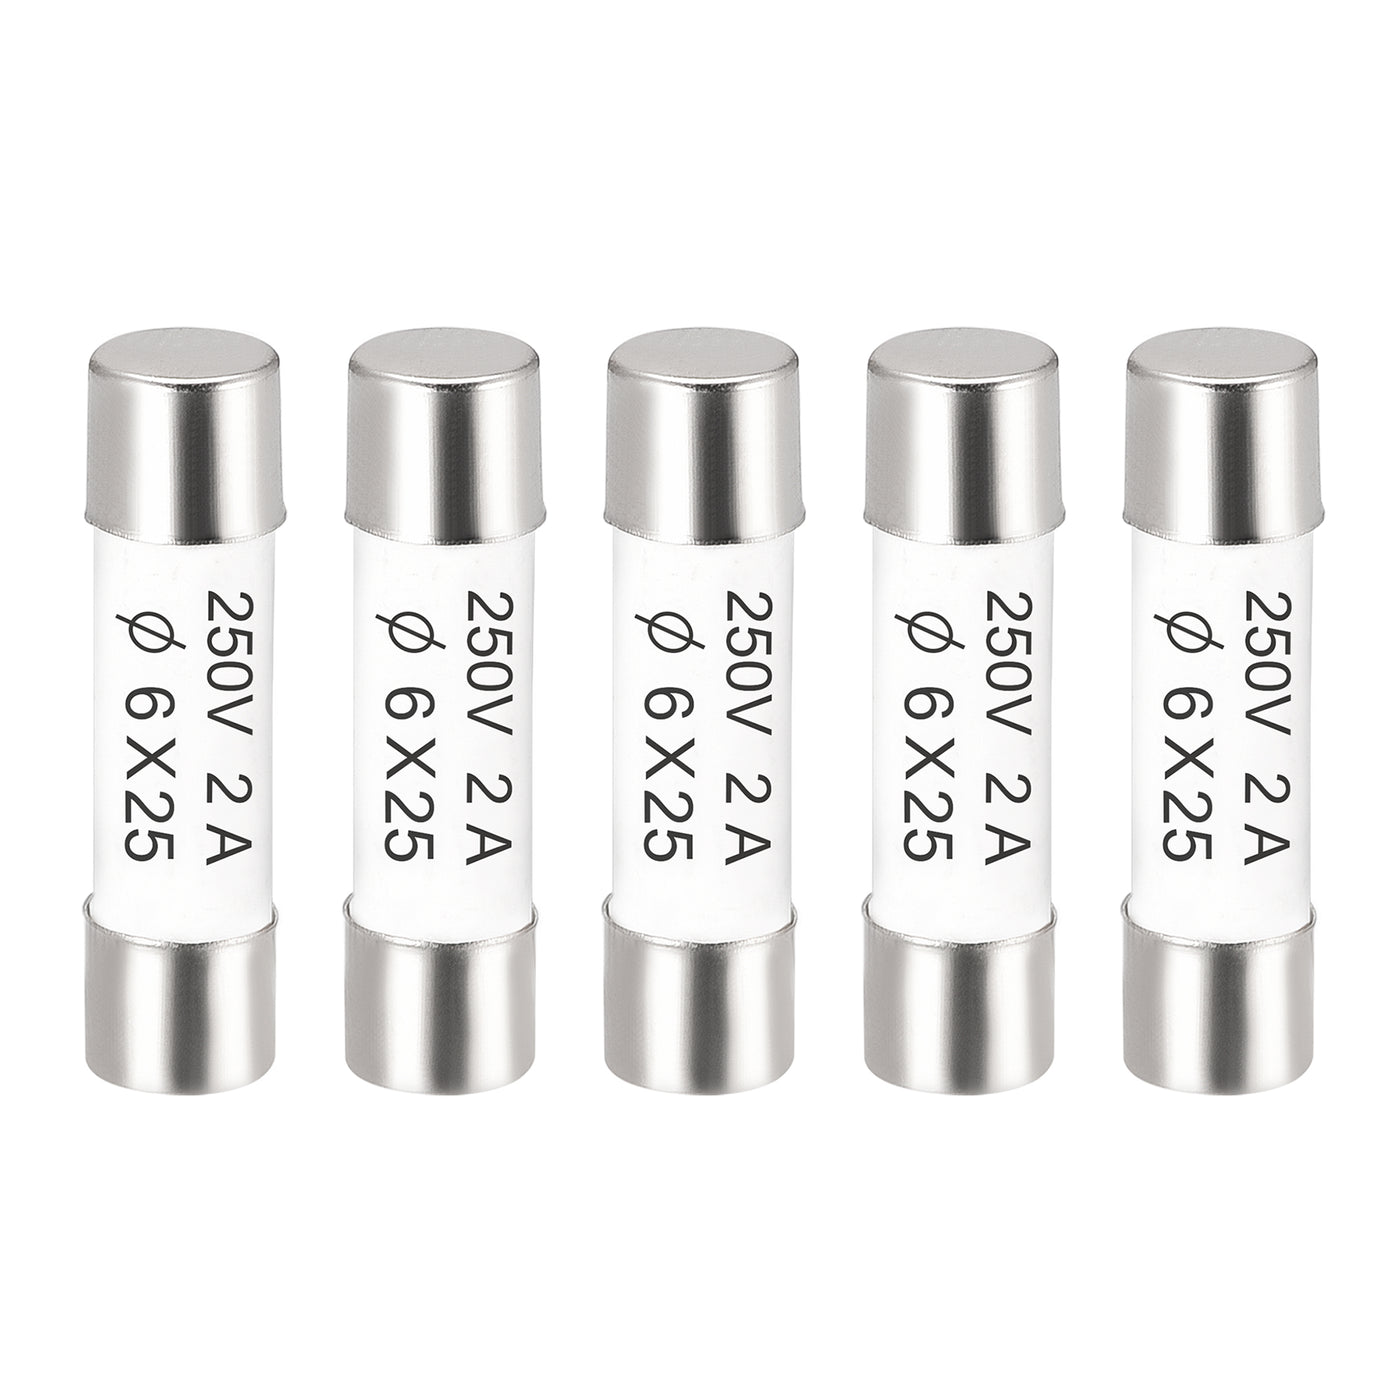 uxcell Uxcell Ceramic Cartridge Fuses 2A 250V 6x25mm Fast Blow for Energy Saving Lamp 5pcs